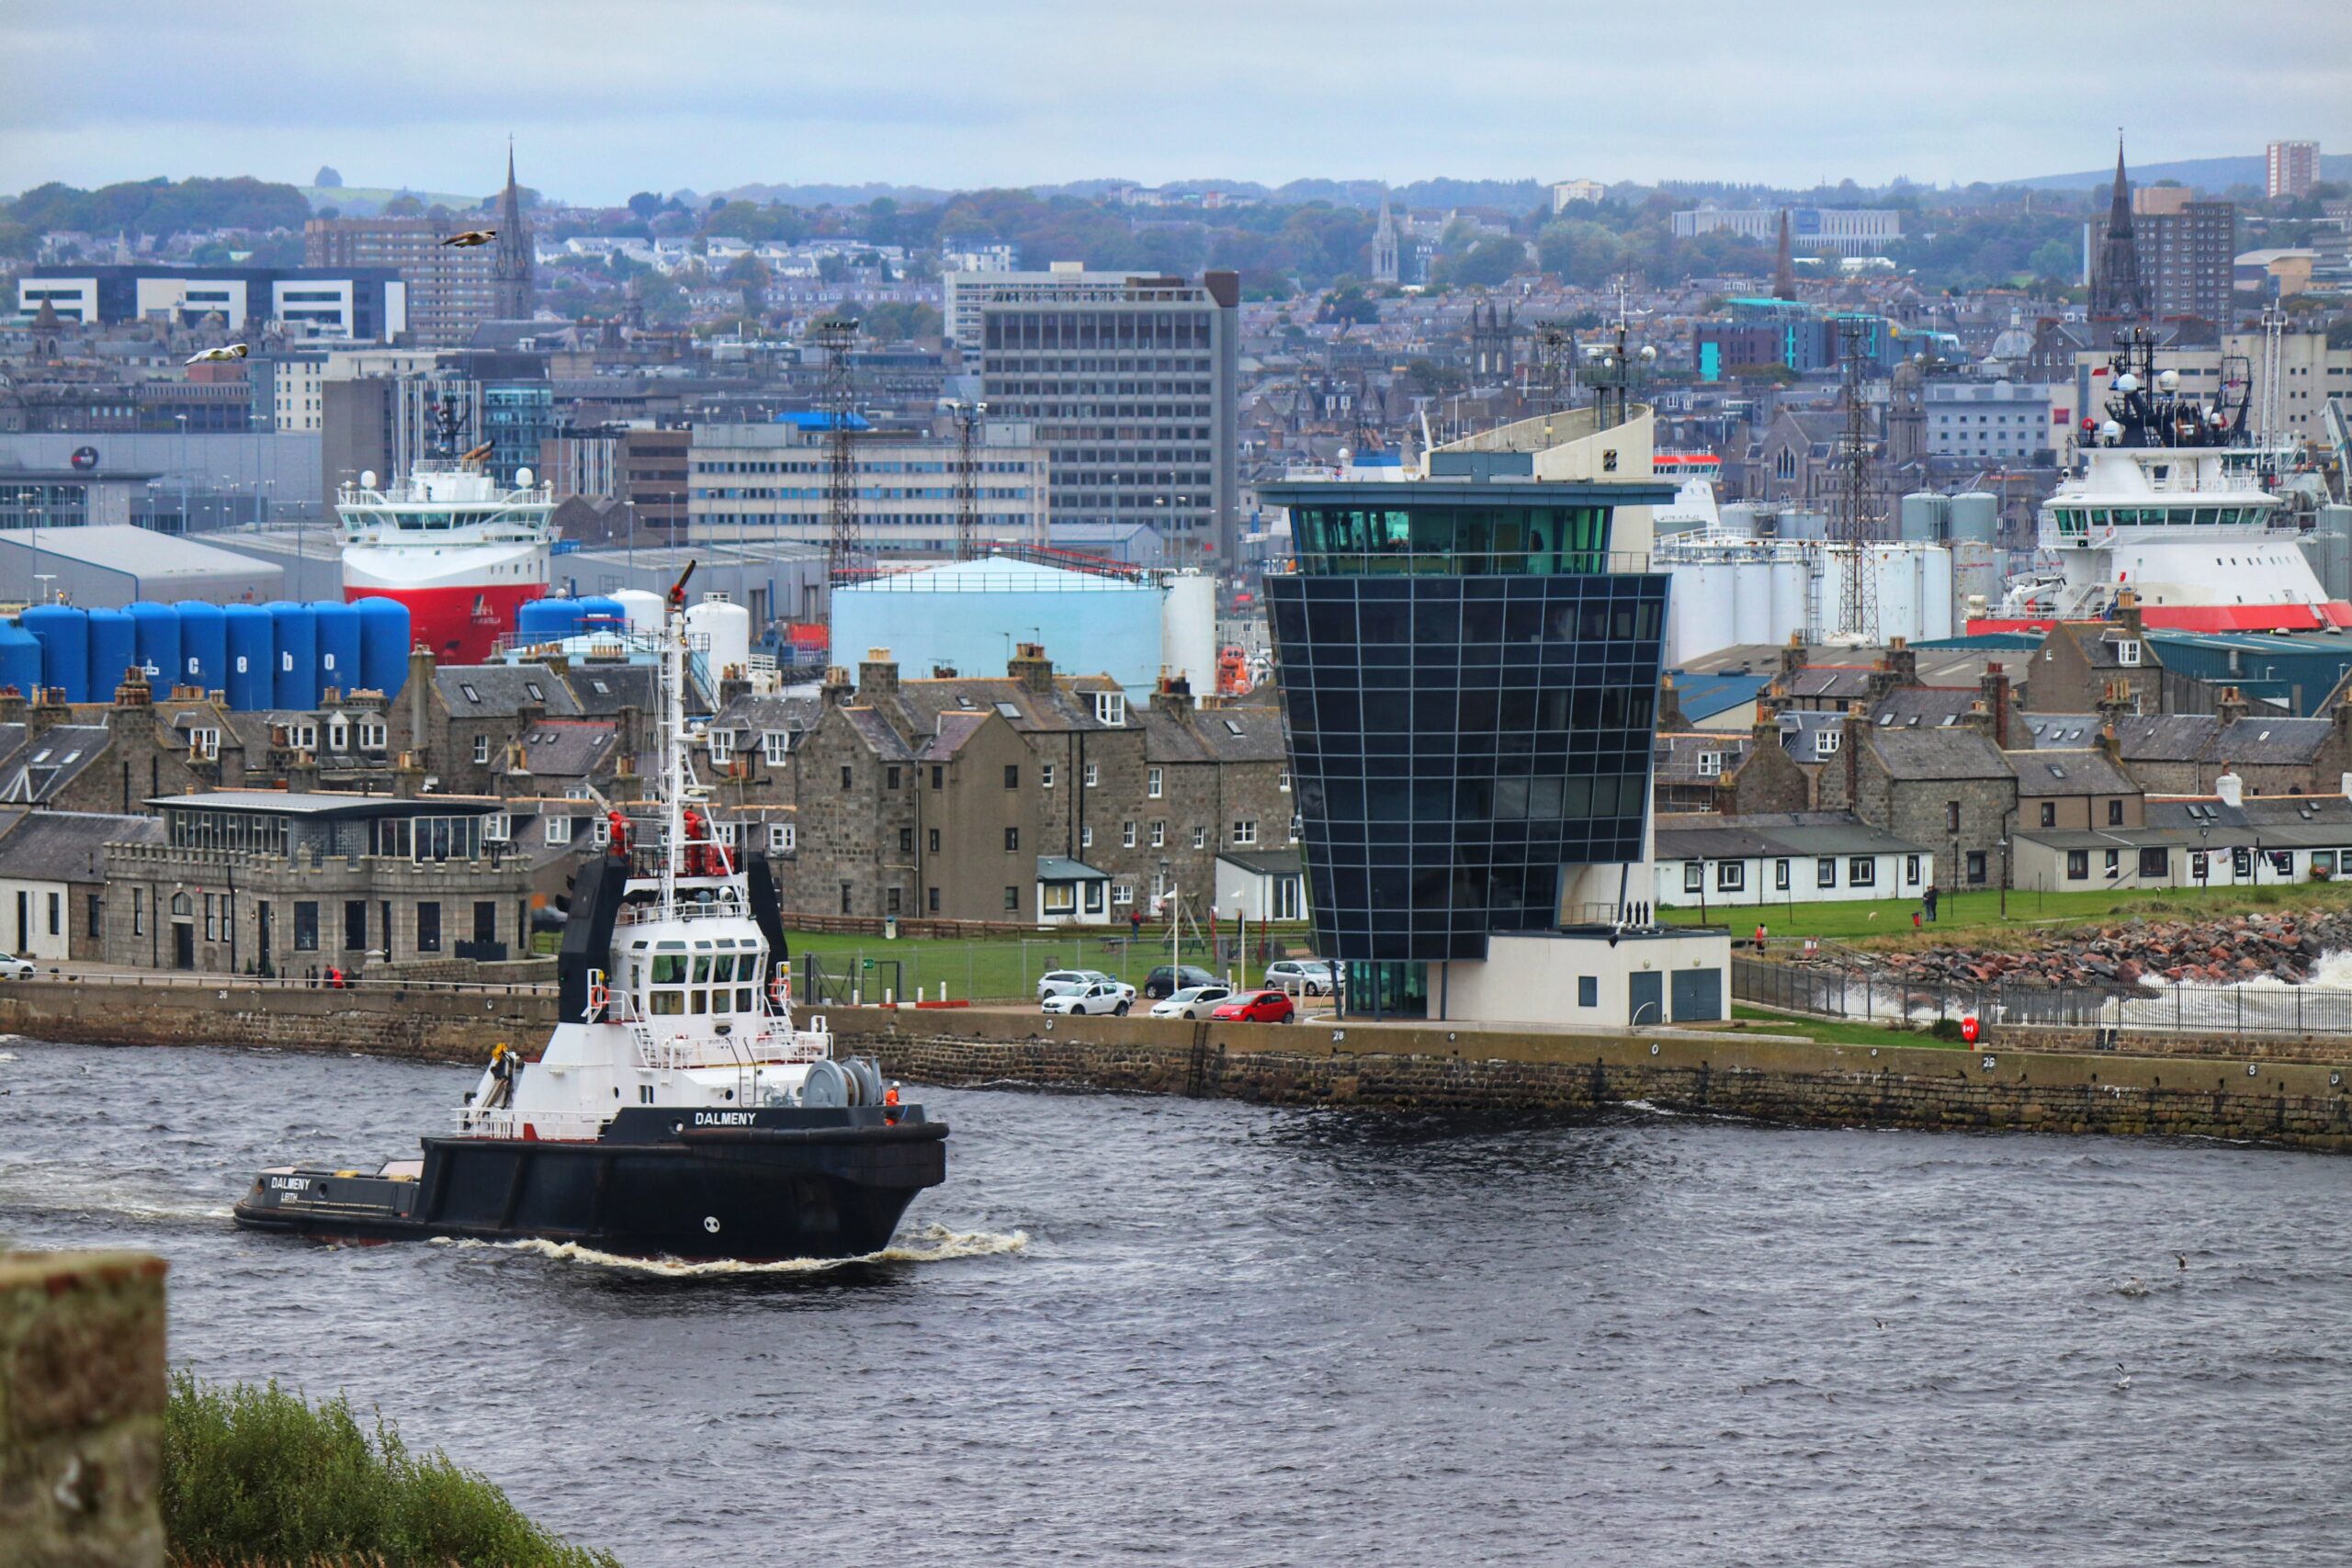 MEMBER NEWS: Aberdeen offers ‘unrivalled’ opportunity to be at the forefront of net-zero